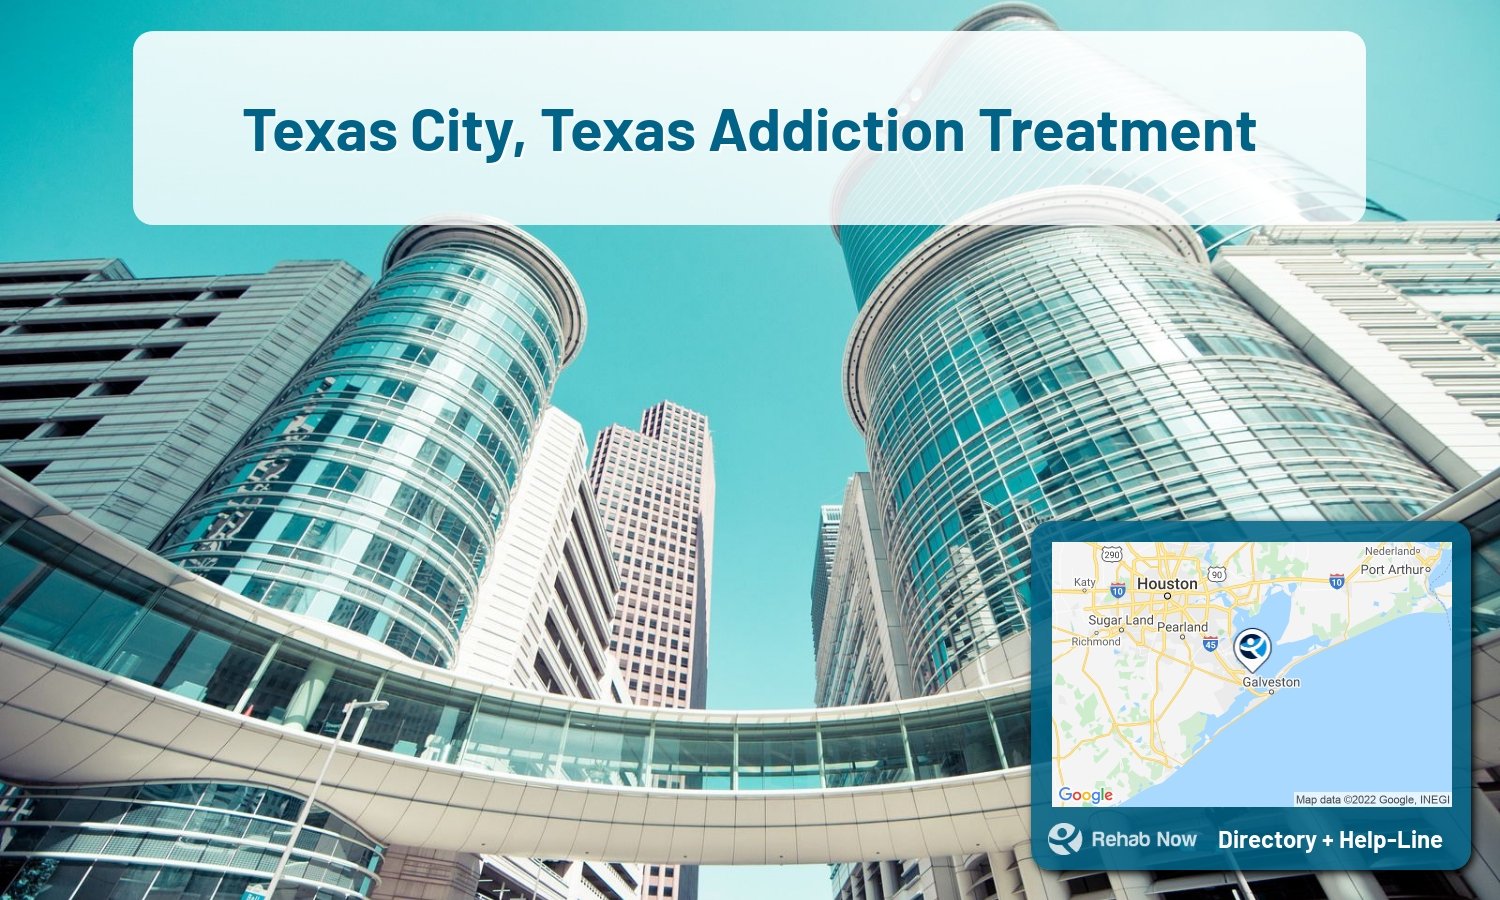 Let our expert counselors help find the best addiction treatment in Texas City, Texas now with a free call to our hotline.